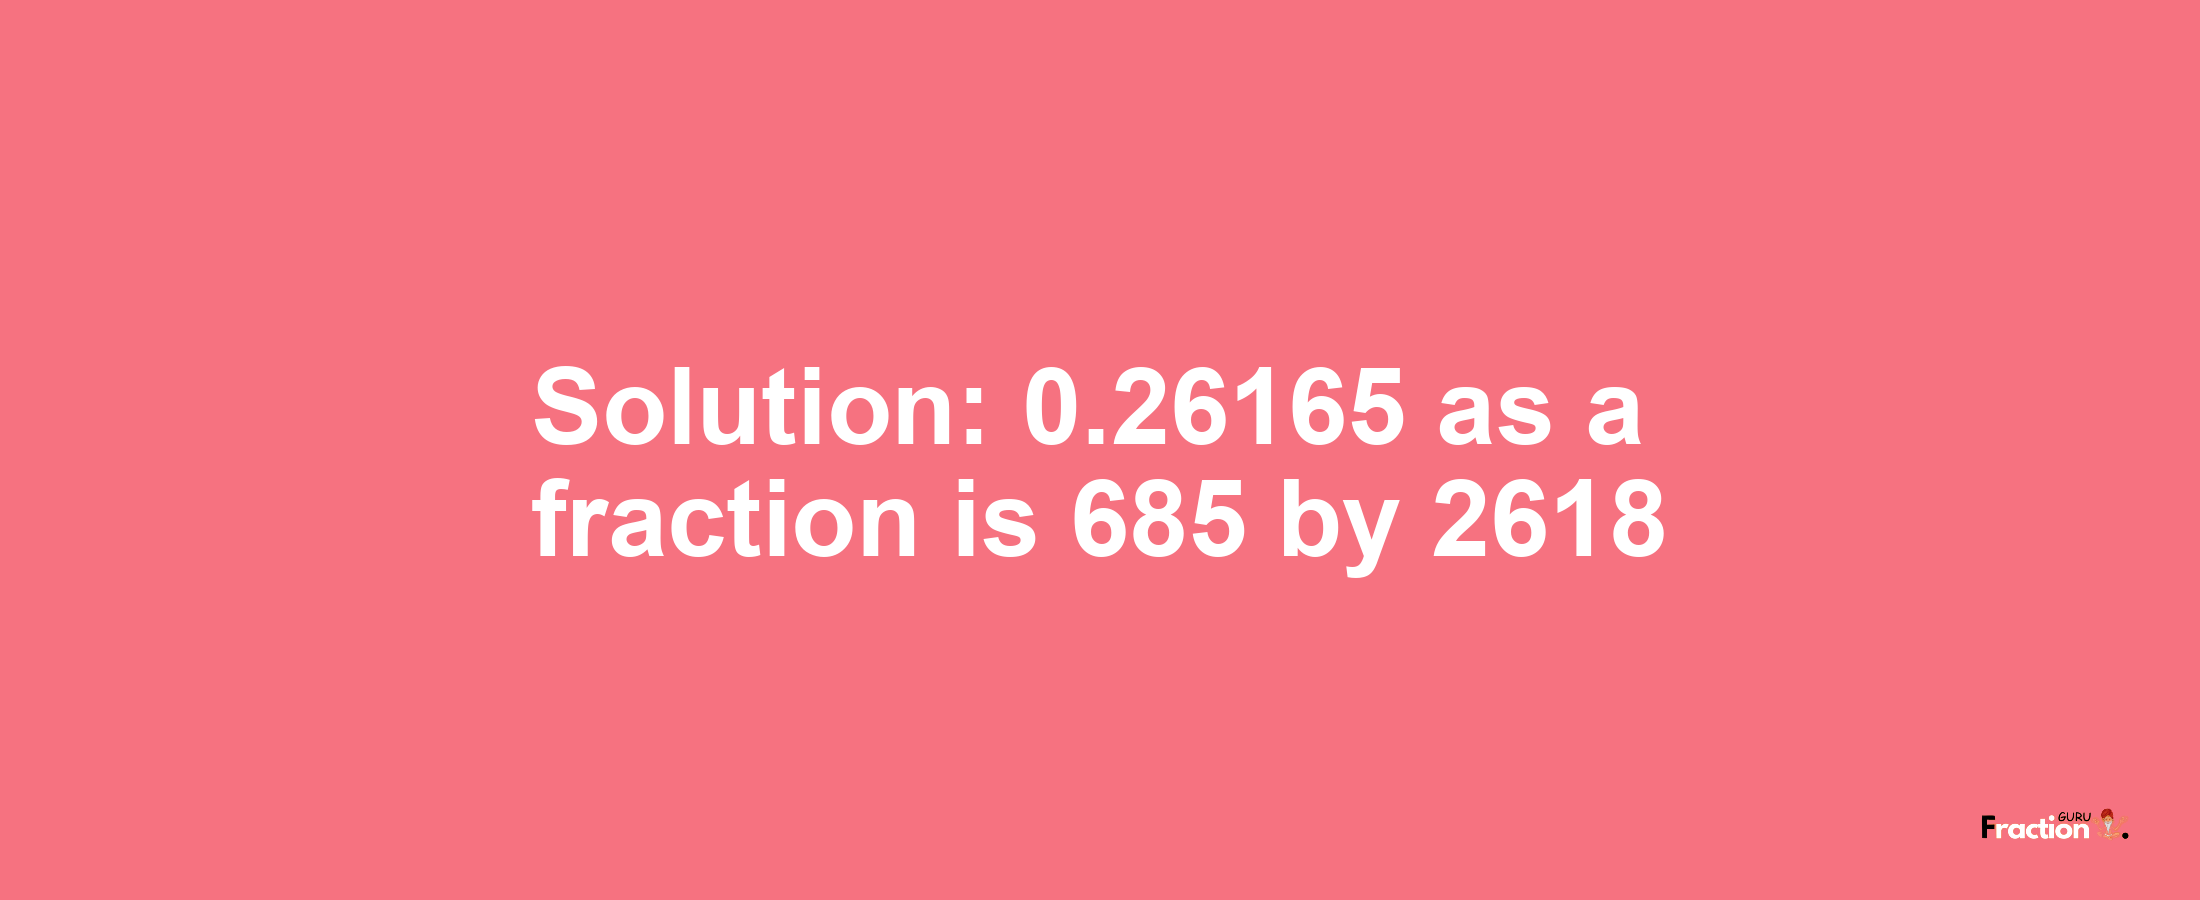 Solution:0.26165 as a fraction is 685/2618